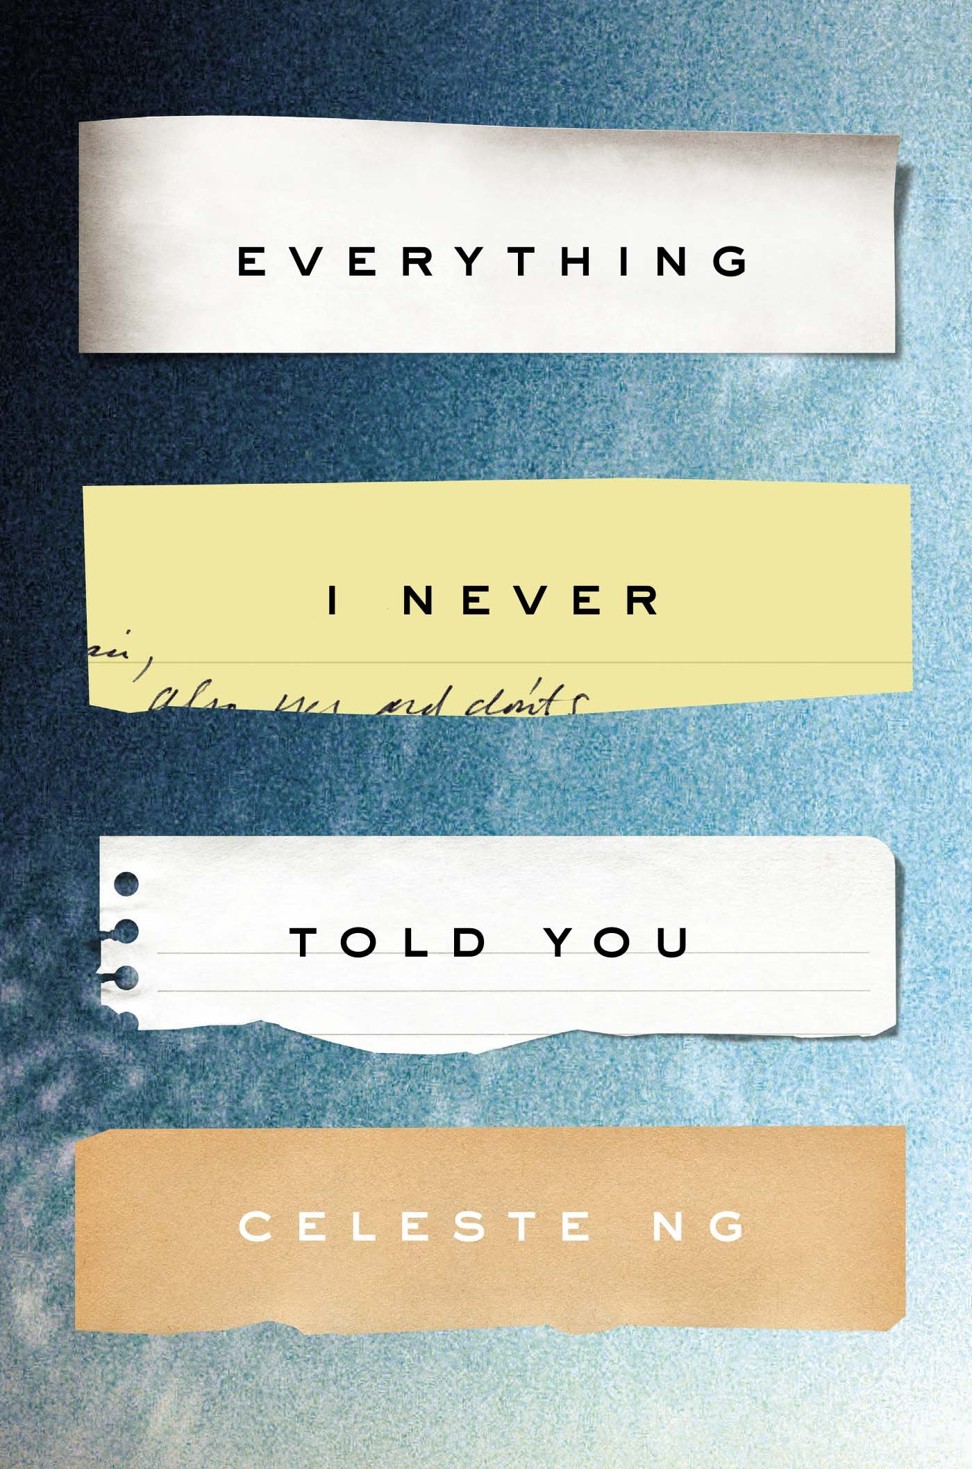 Ng’s debut novel Everything I Never Told You won an Asian/Pacific American Award for Literature.